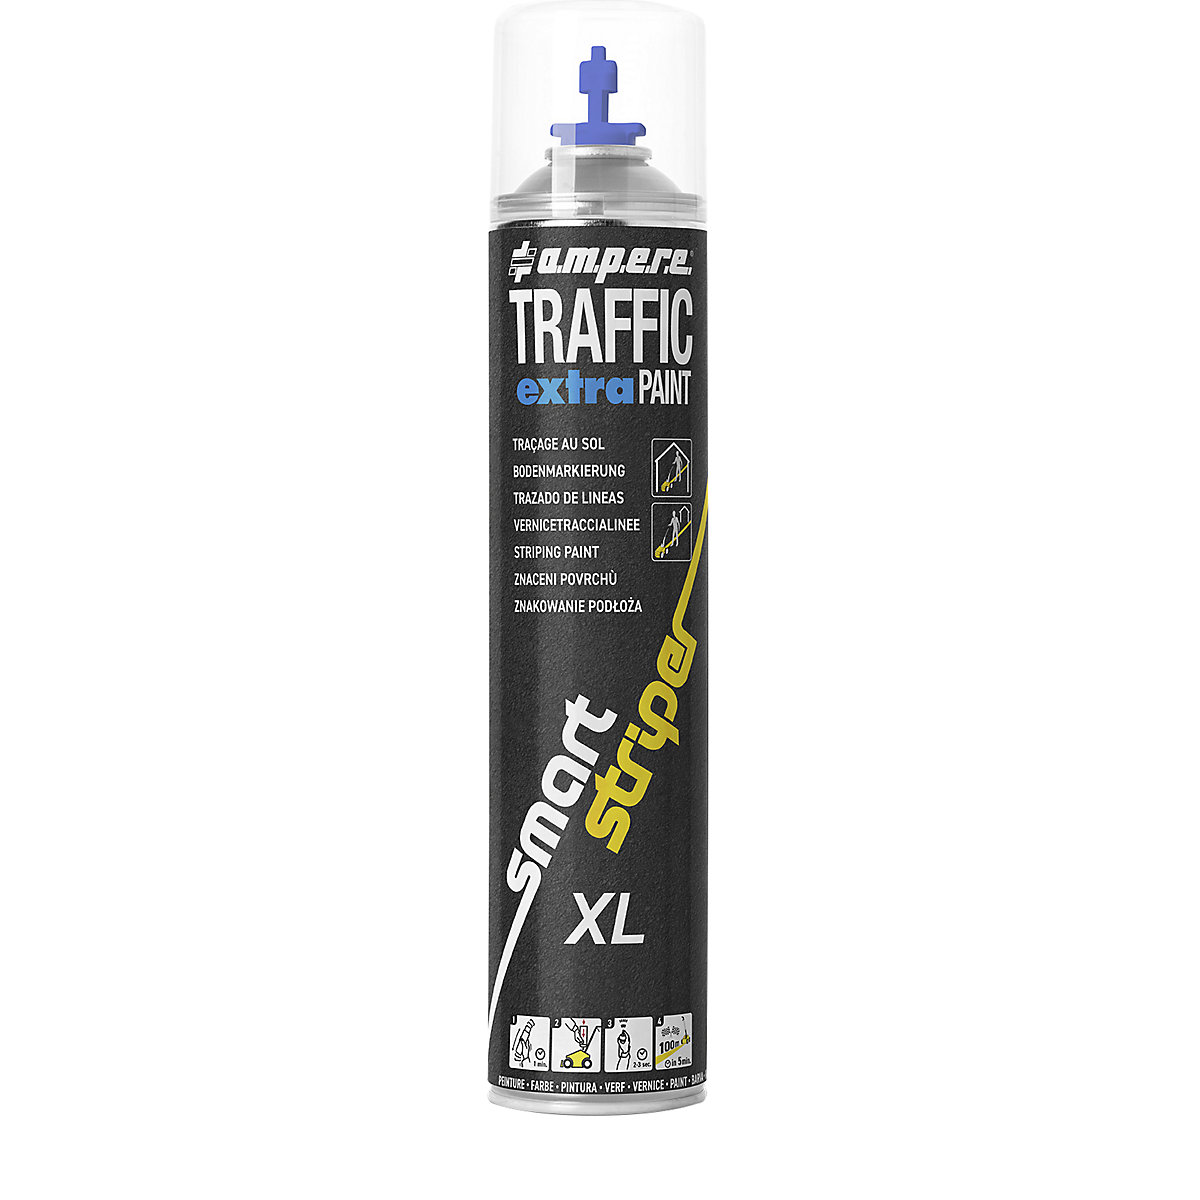 Traffic extra Paint® XL marking paint – Ampere, contents 750 ml, pack of 6, blue-6